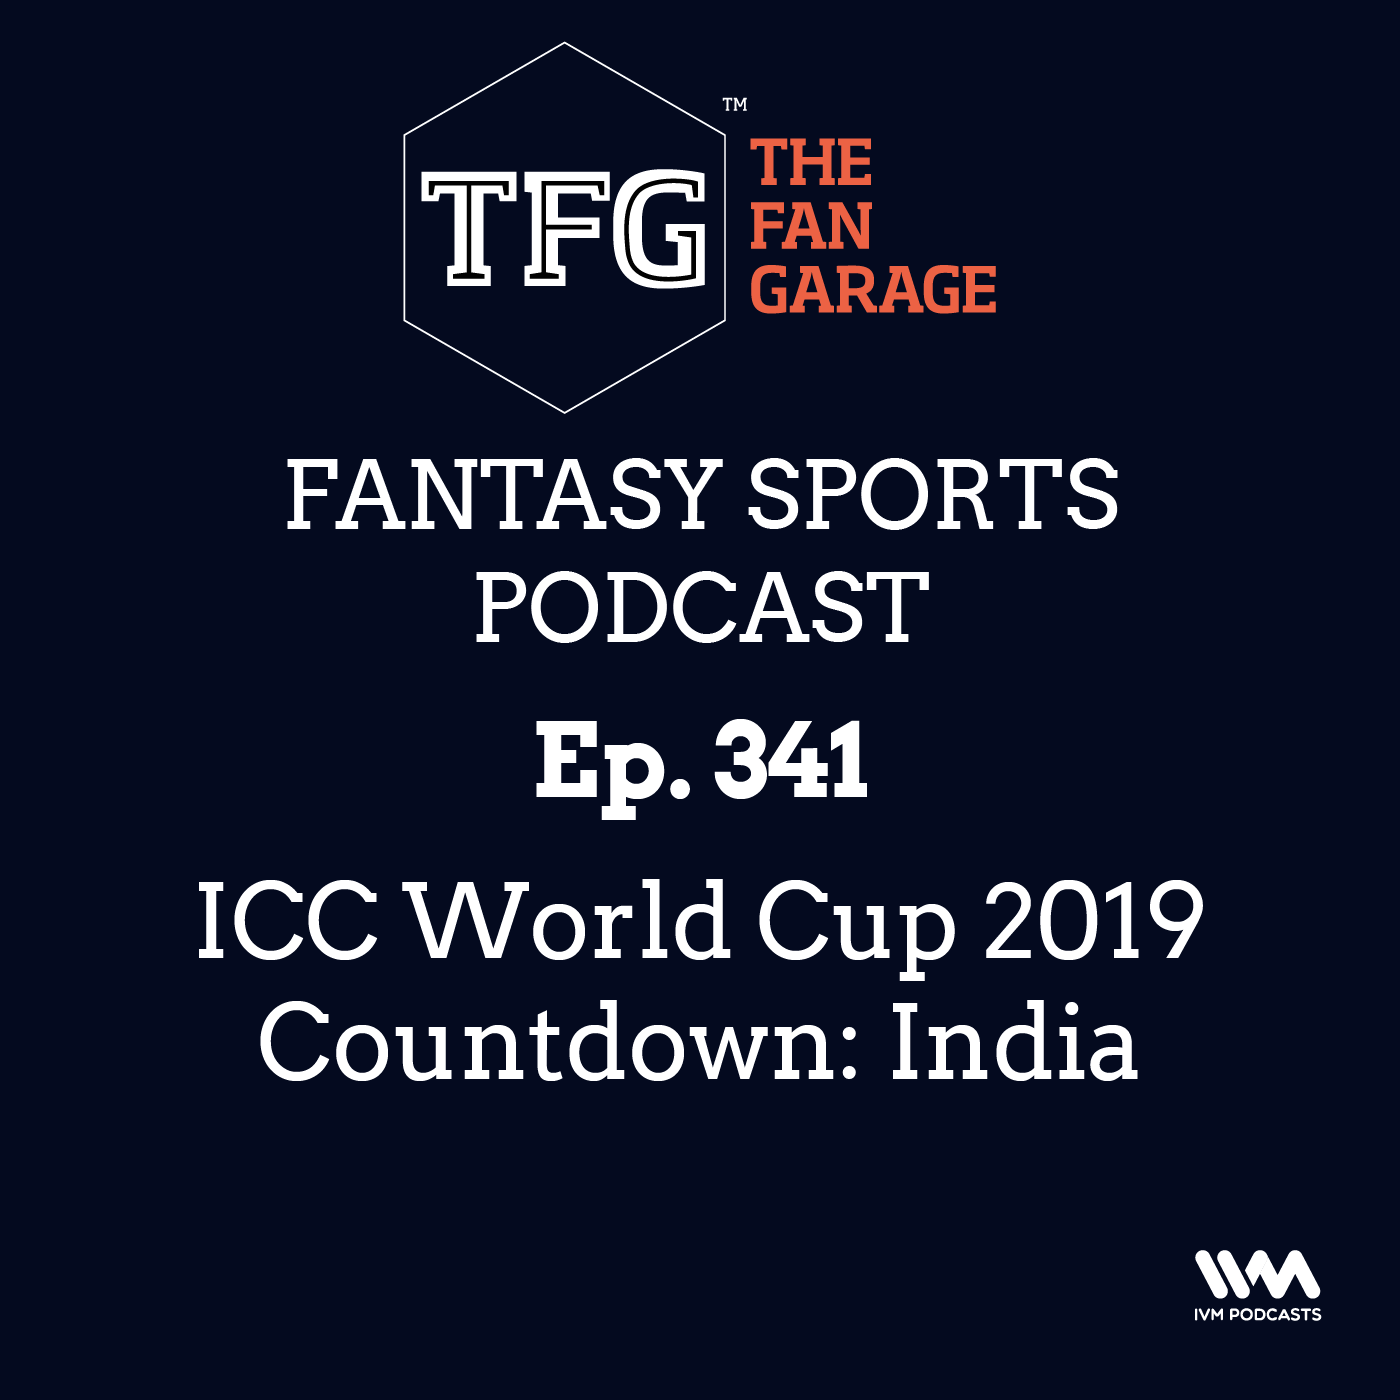 TFG Fantasy Sports Podcast Ep. 341: ICC World Cup 2019 Countdown: India